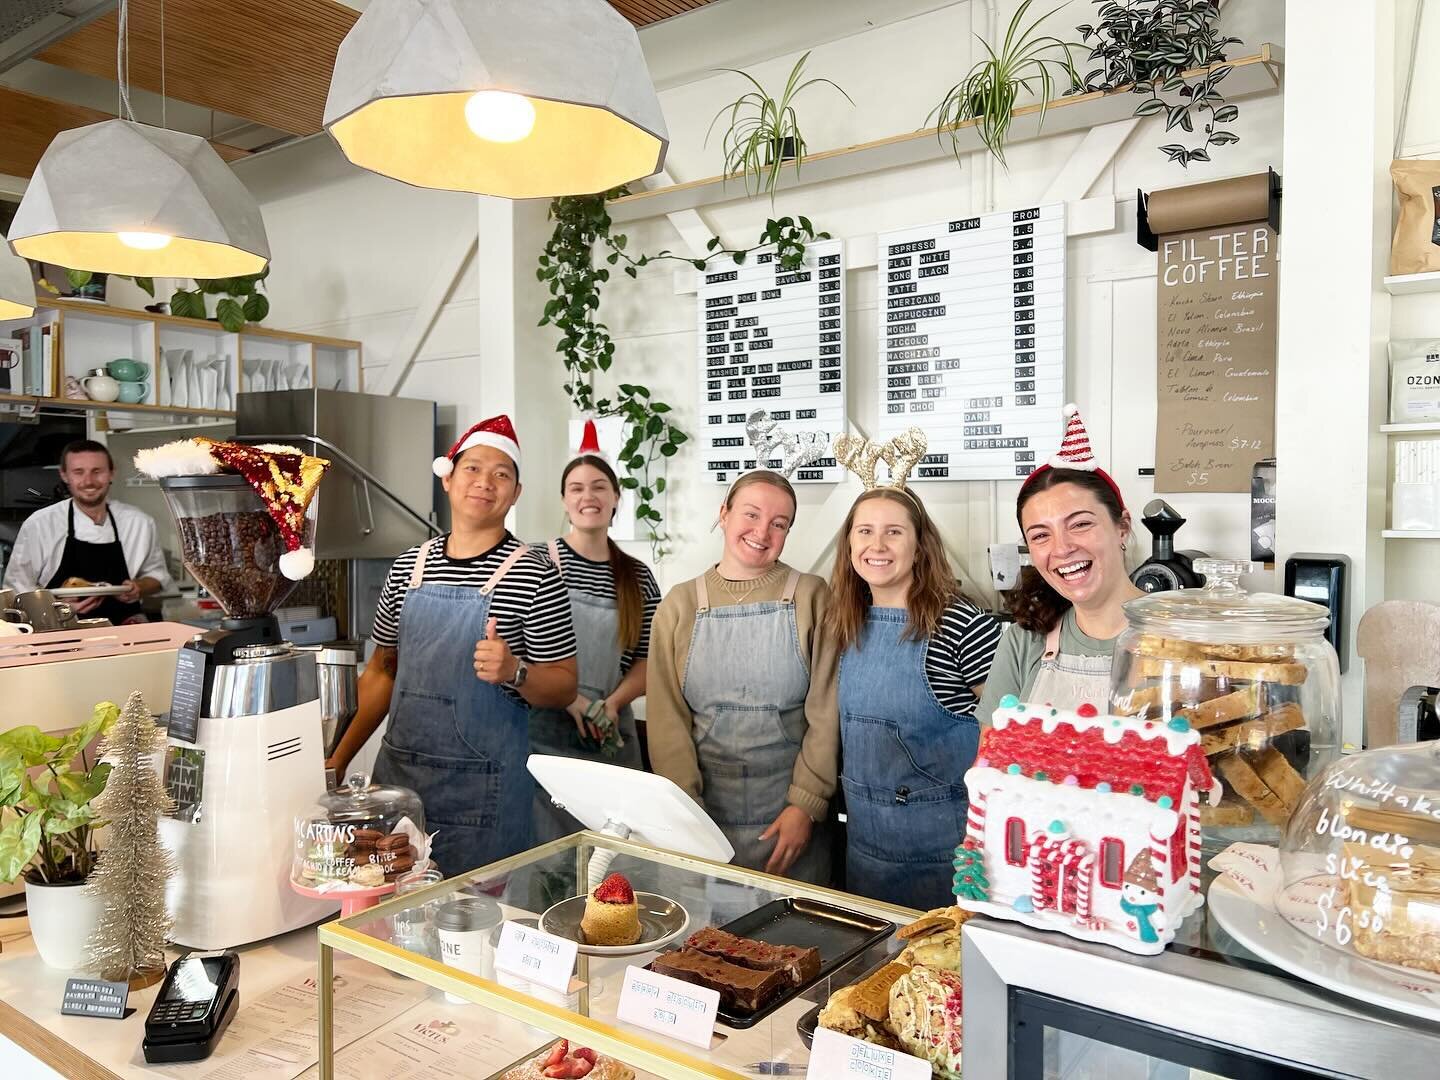 Tomorrow is the last day to get in before we shut for a few days for the Christmas break and to see these lovely faces. 🎄
Make sure you get in to get stocked up on Christmas treats &amp; coffee for home. We&rsquo;ll be open 7-3pm tomorrow 👋🏼💝
.
#